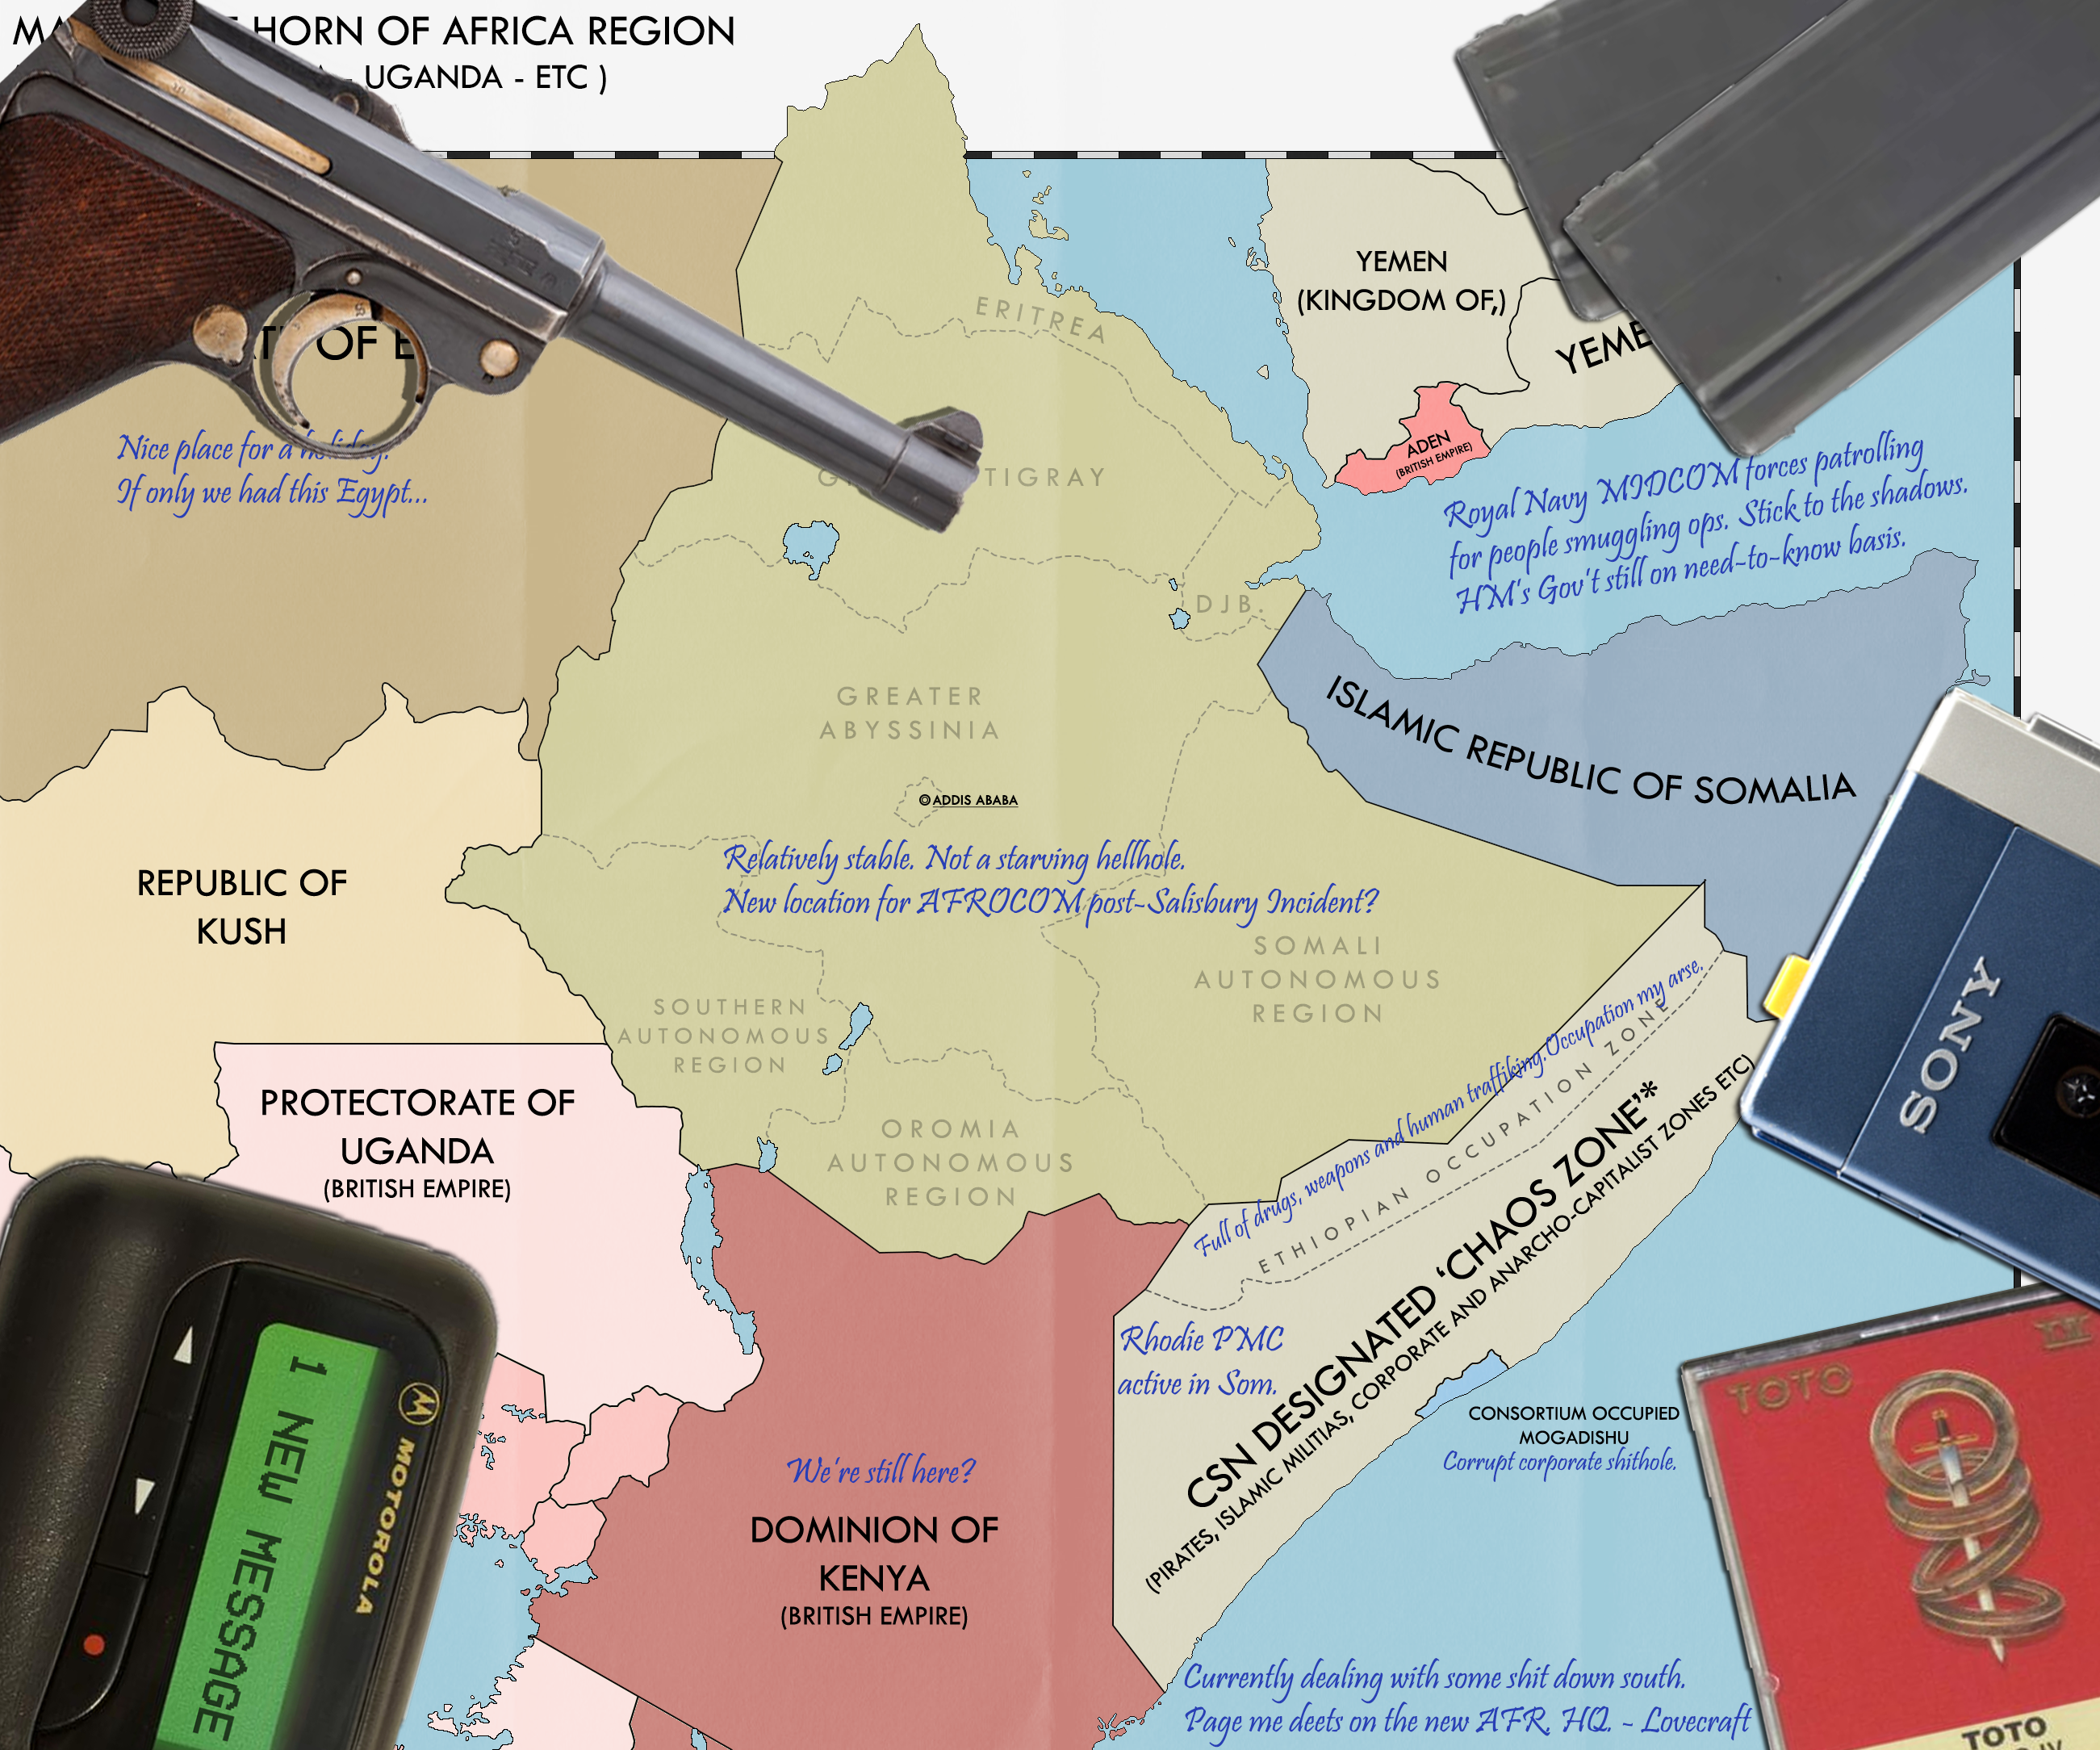 map_of_the_horn_of_africa____marcus_s_copy__rev___by_kitfisto1997-dbug6pw.png